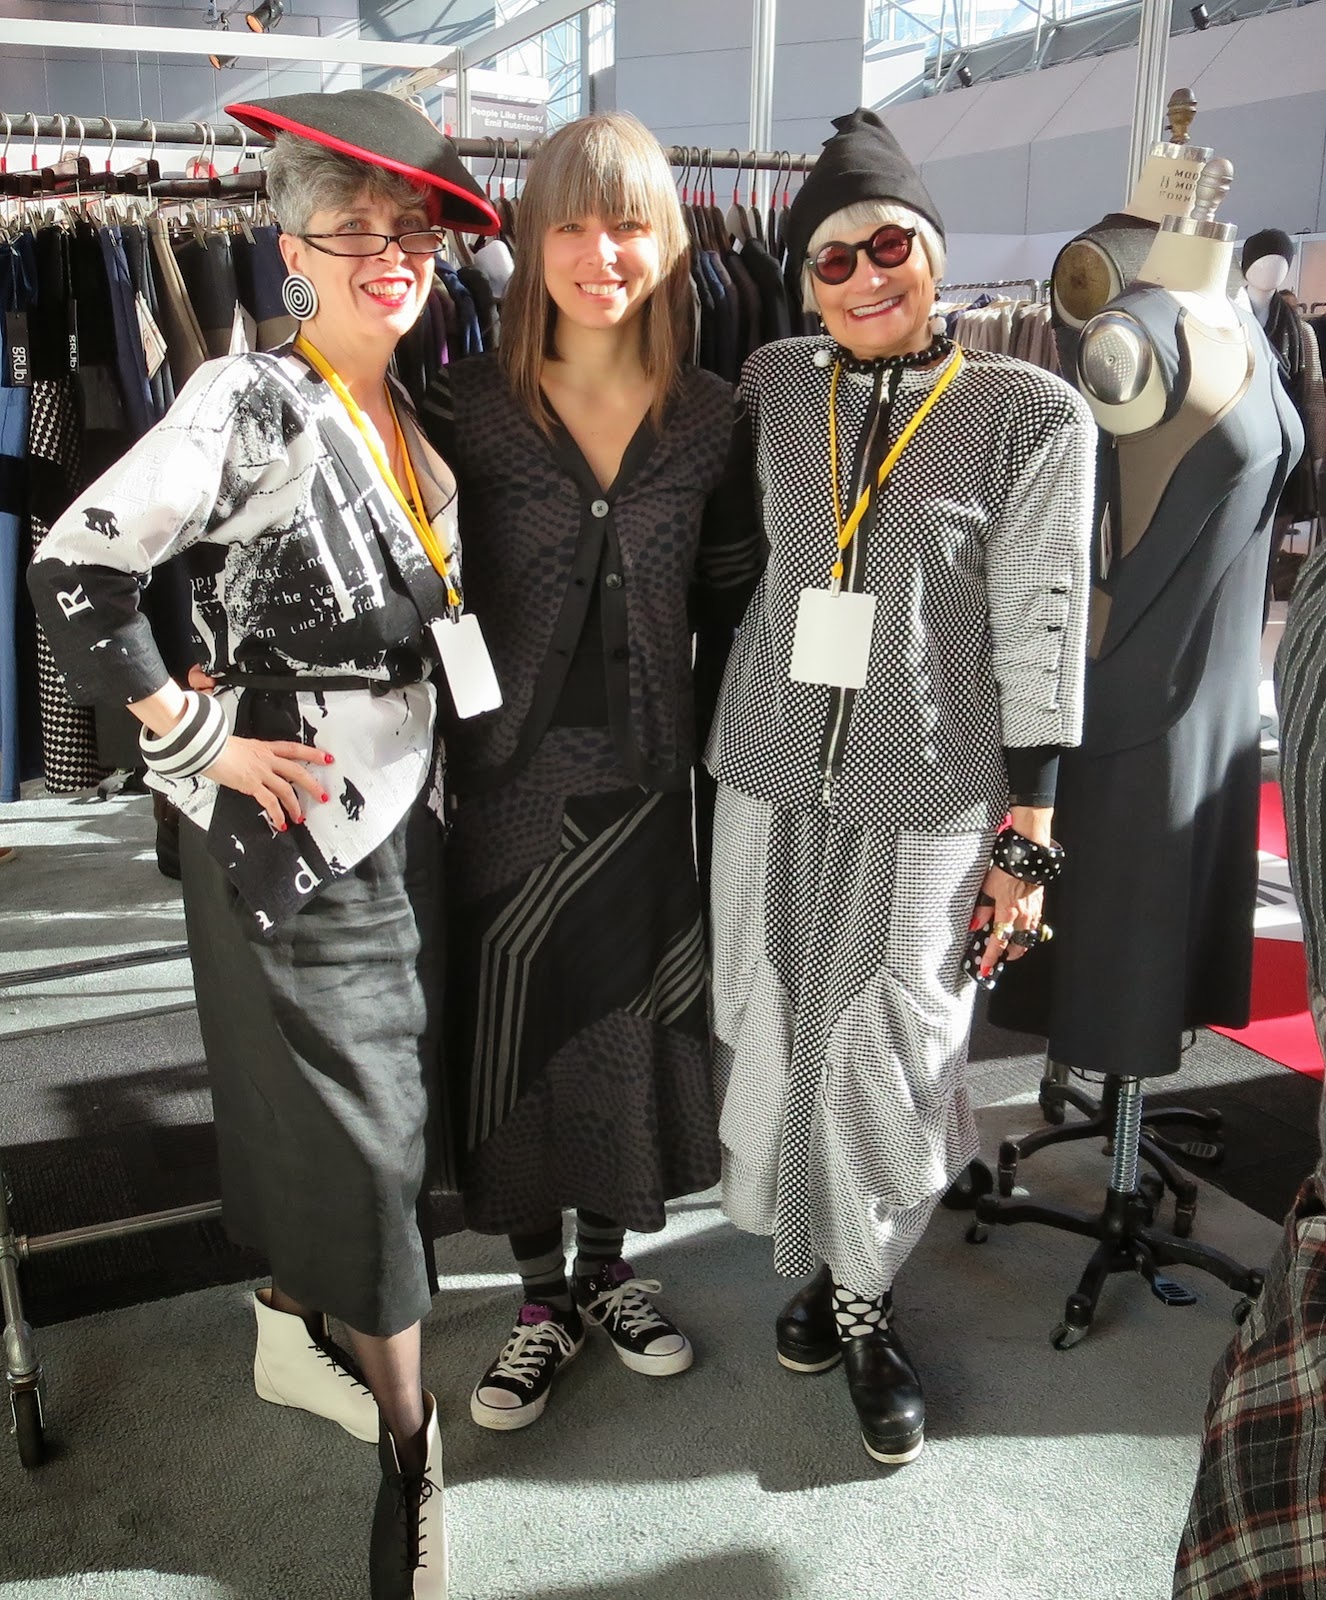 Idiosyncratic Fashionistas: Trade Show Hijinks at ENK's Coterie